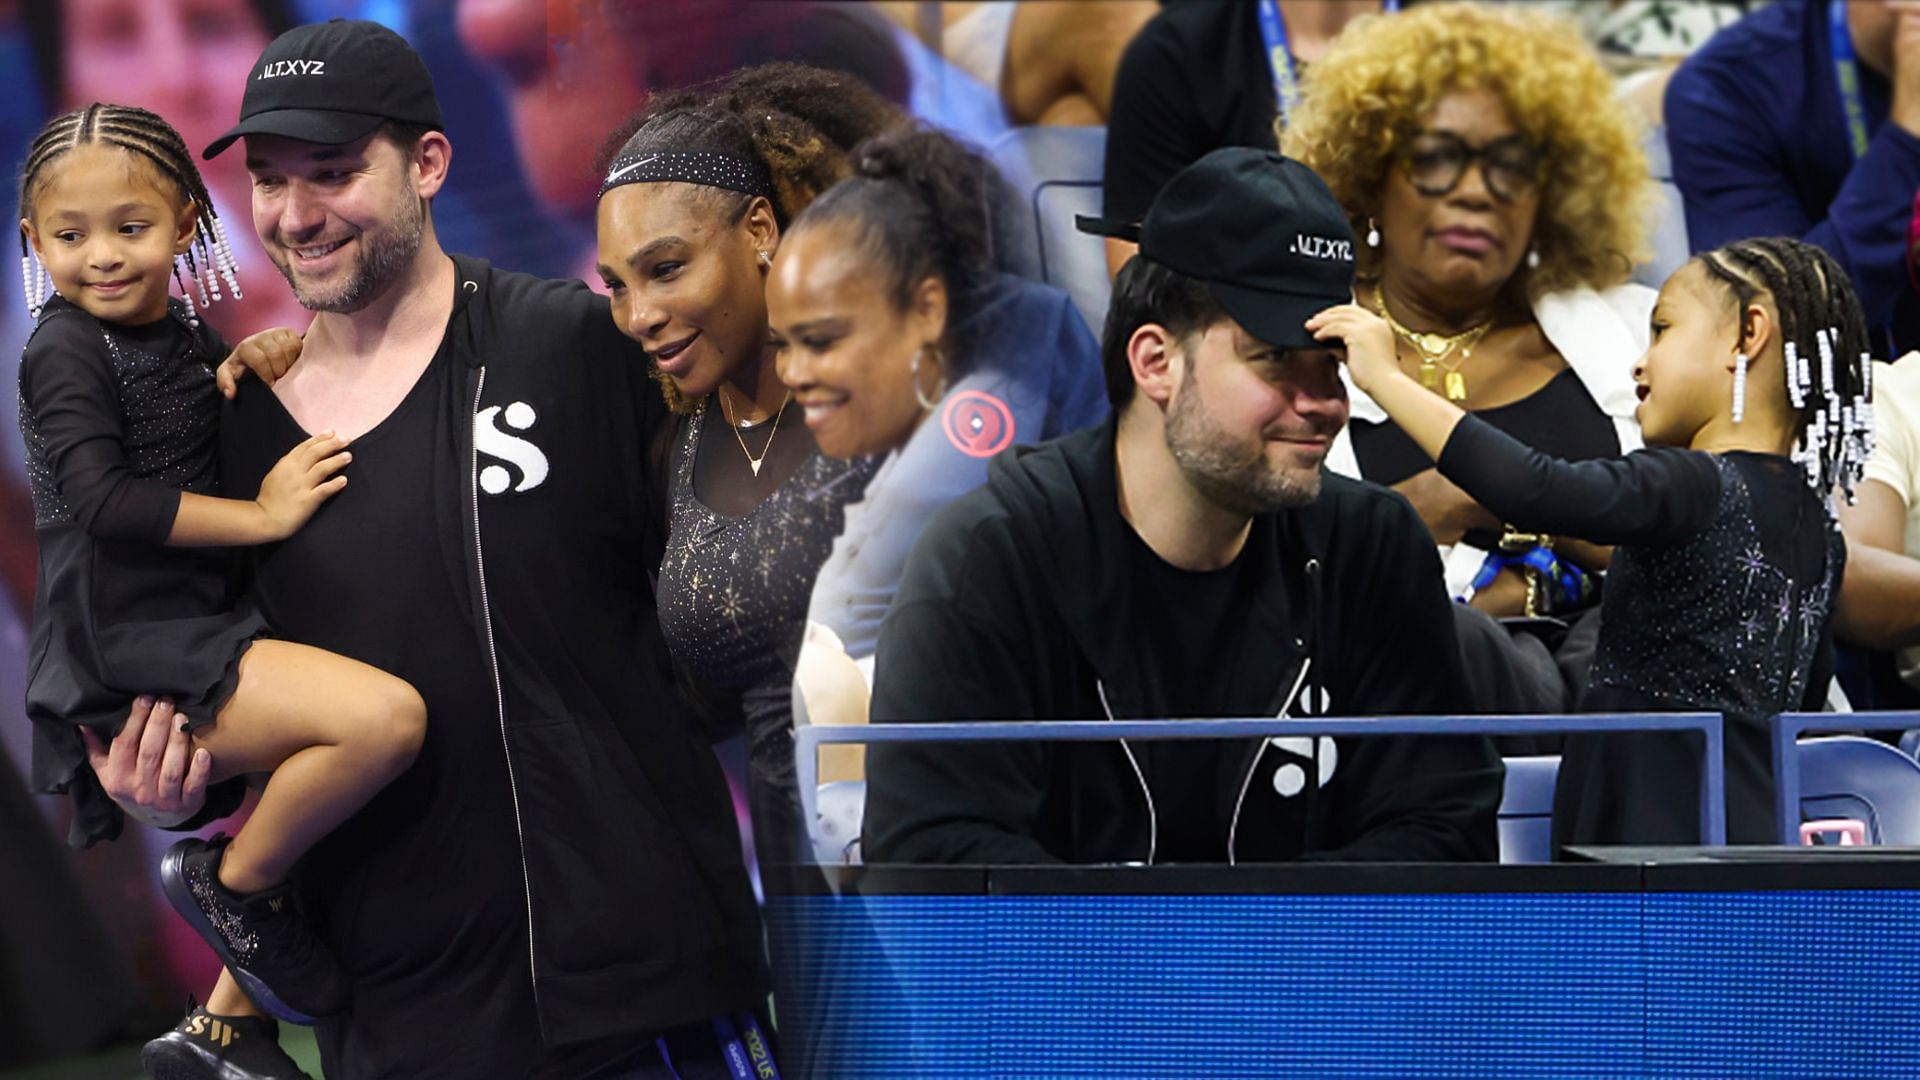 Serena Williams, Alexis Ohanian and their daughter Olympia Ohanian